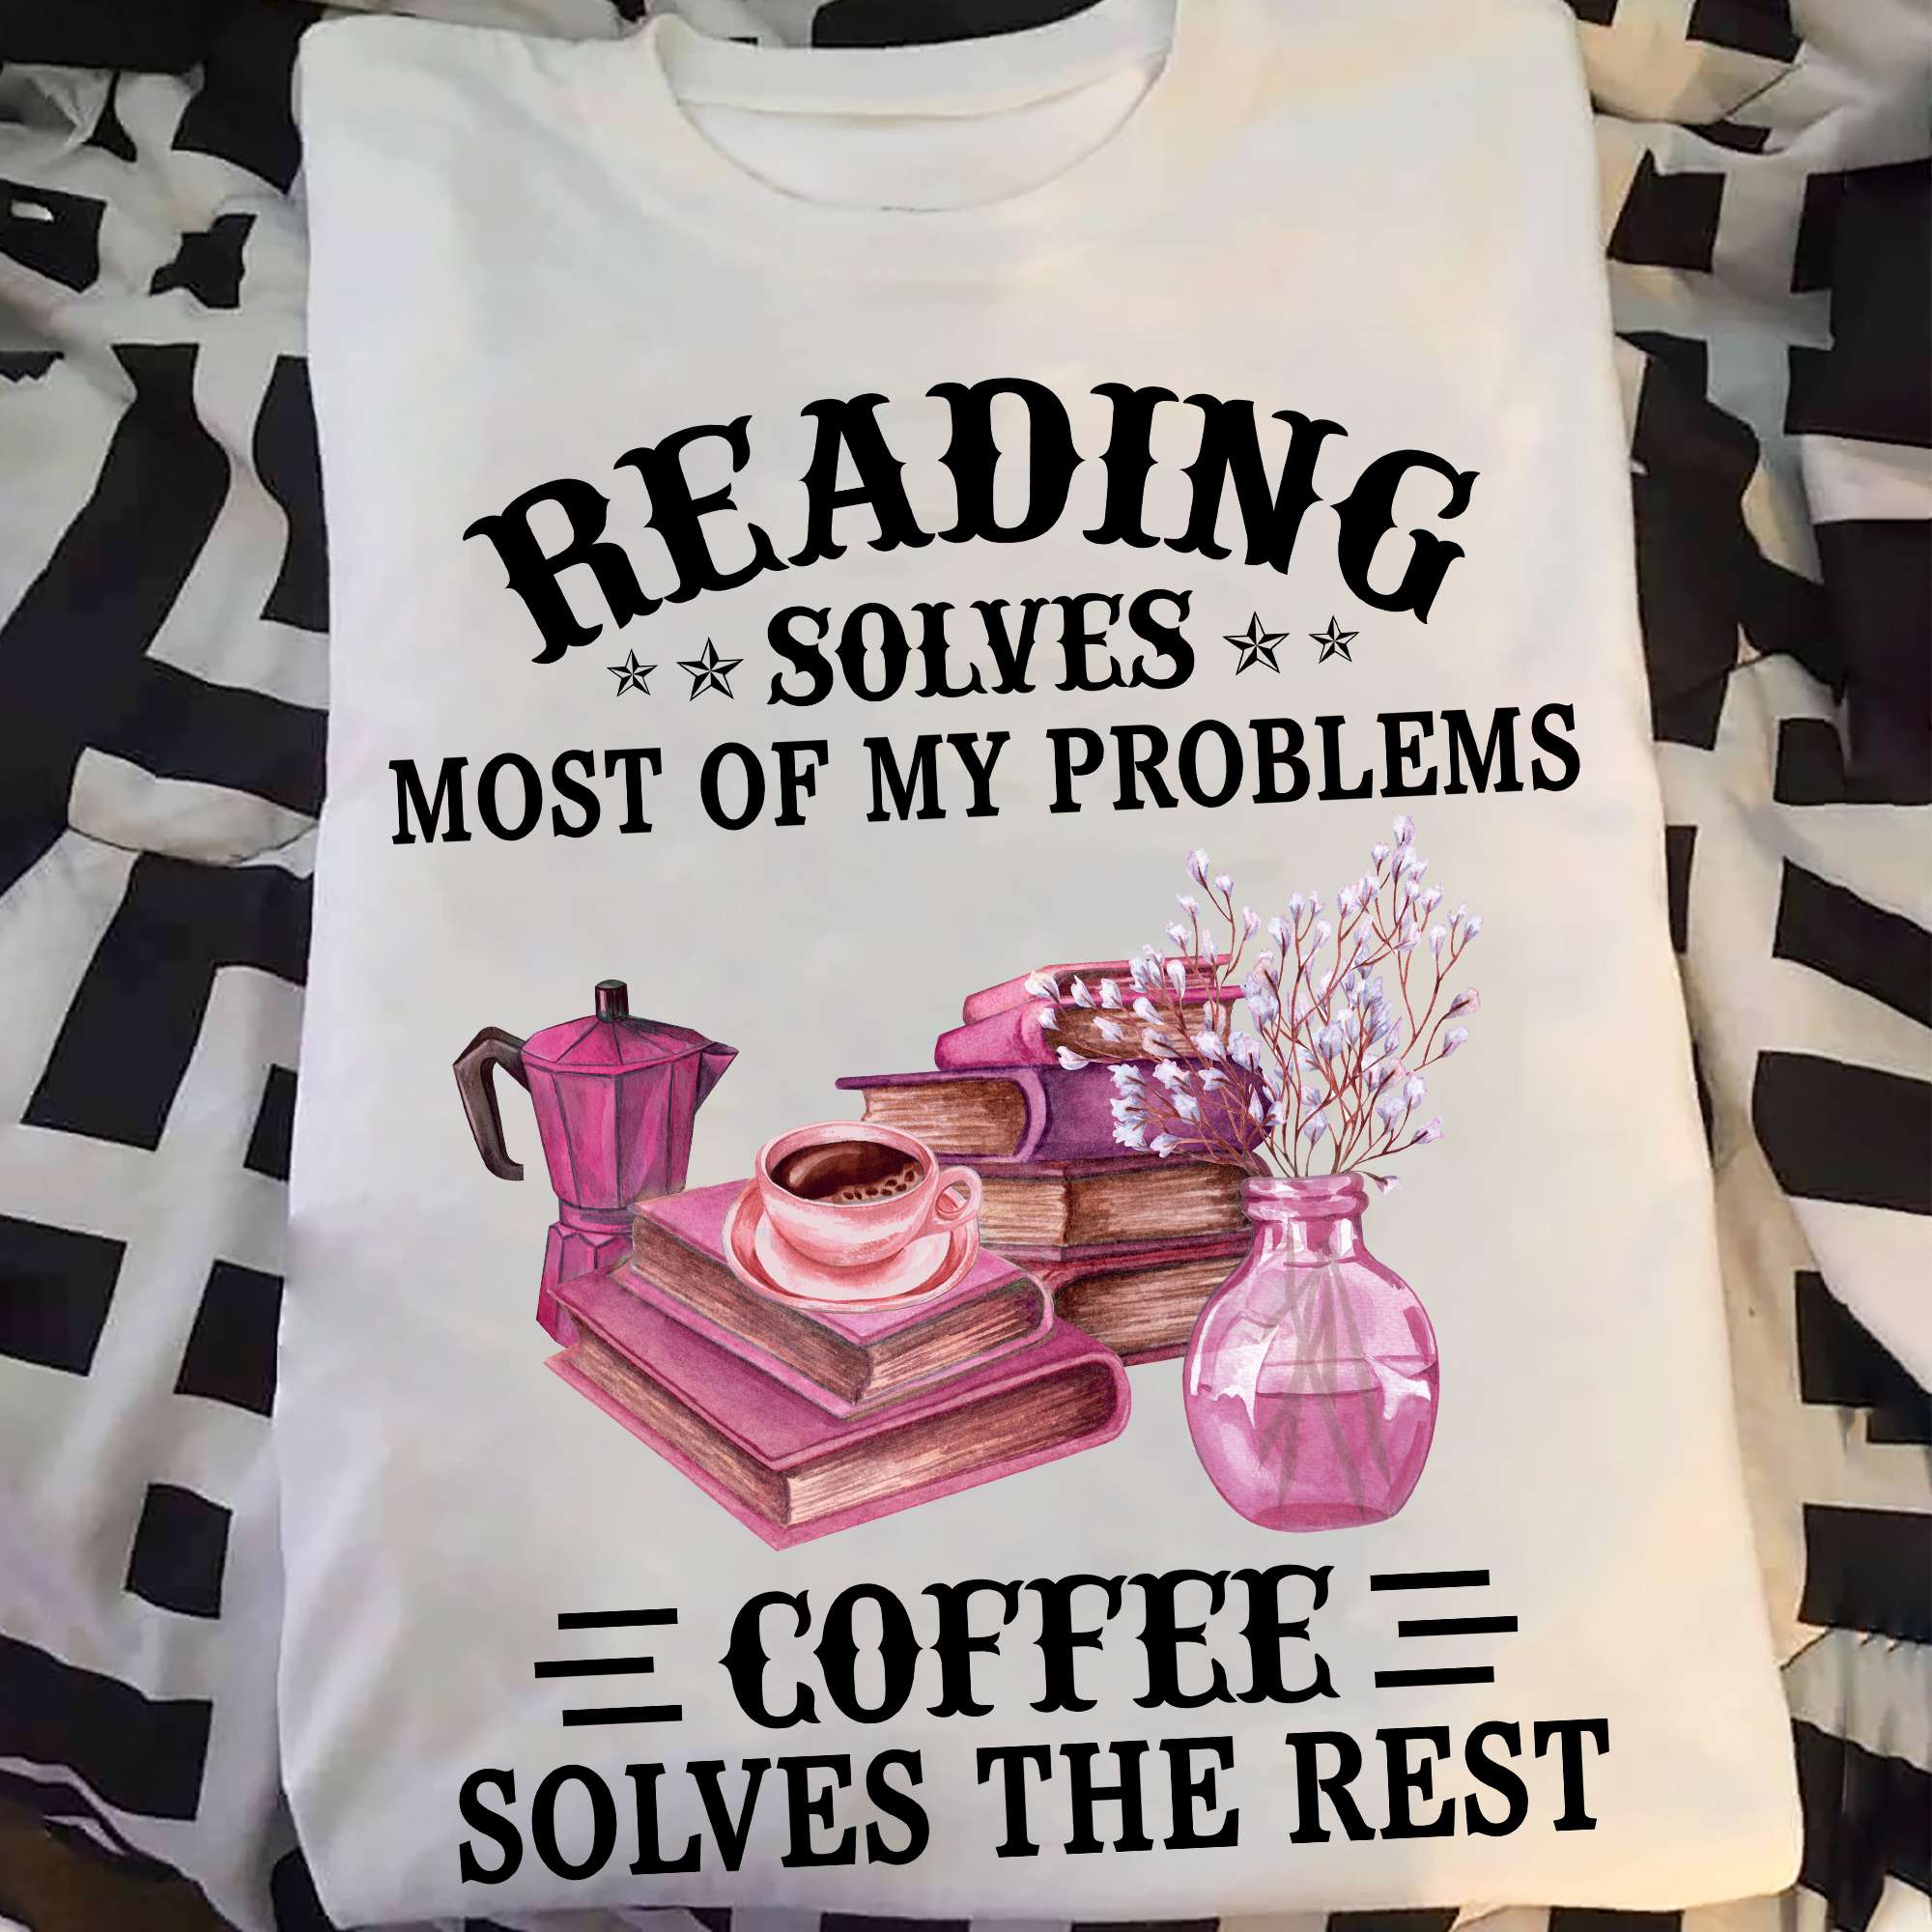 Reading solves most of my problems coffee solves the rest - Coffee and book, hobby combination